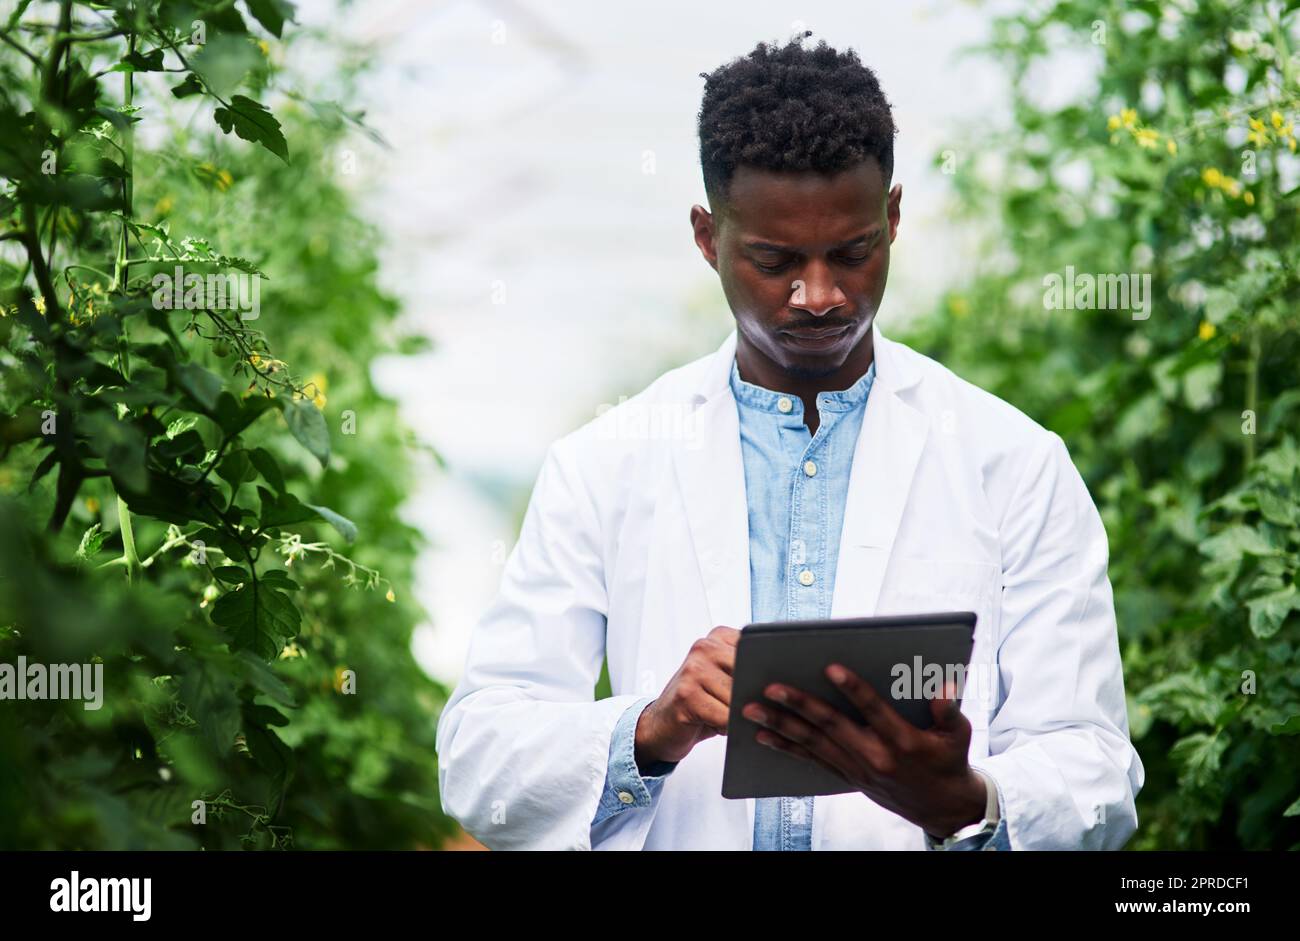 Recording and analyzing data is part of the job. a handsome young botanist using a digital tablet while working outdoors in nature. Stock Photo